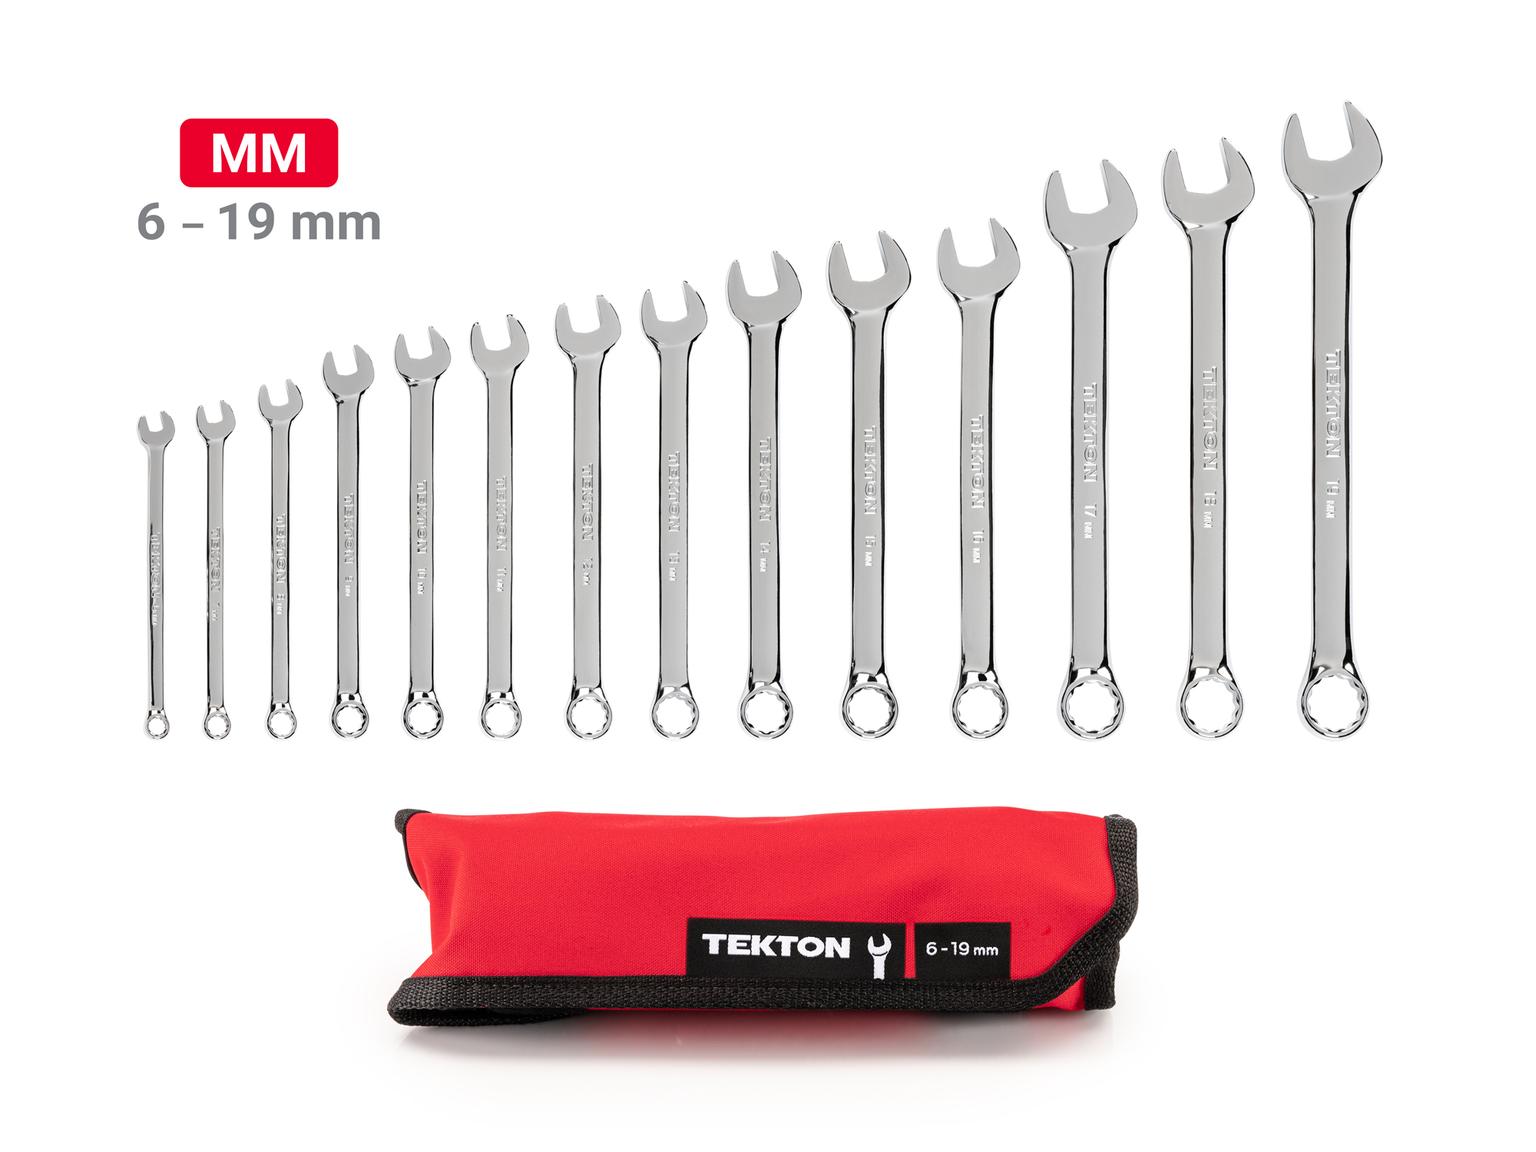 TEKTON WCB94201-T Combination Wrench Set with Pouch, 14-Piece (6 - 19 mm)